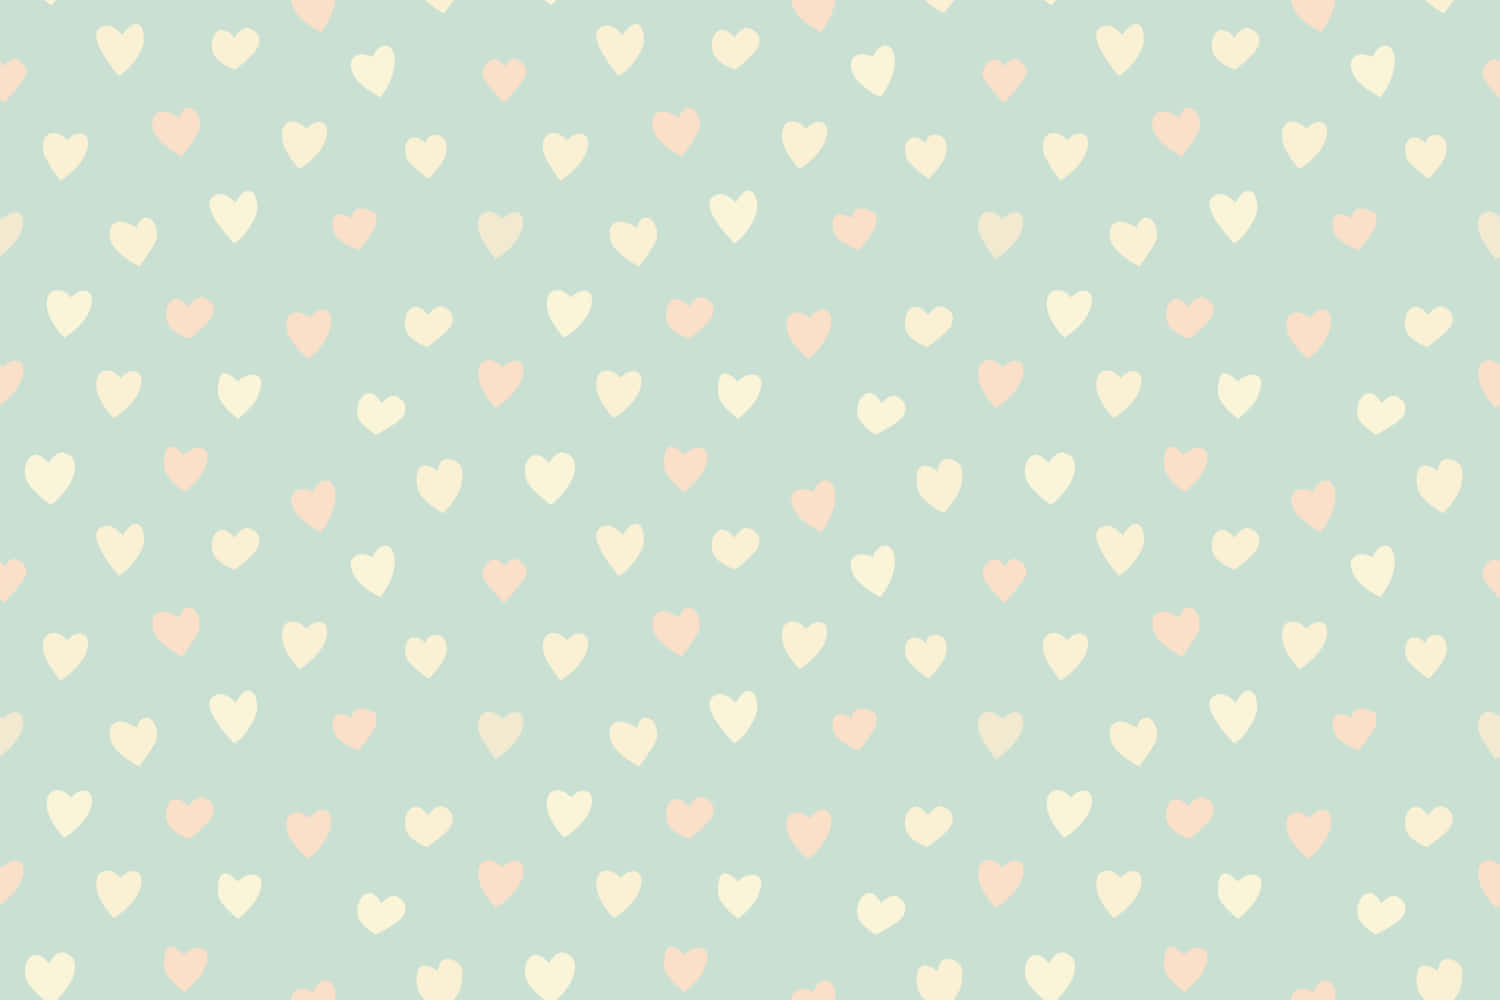 A Pink And Blue Heart Pattern On A Light Blue Background